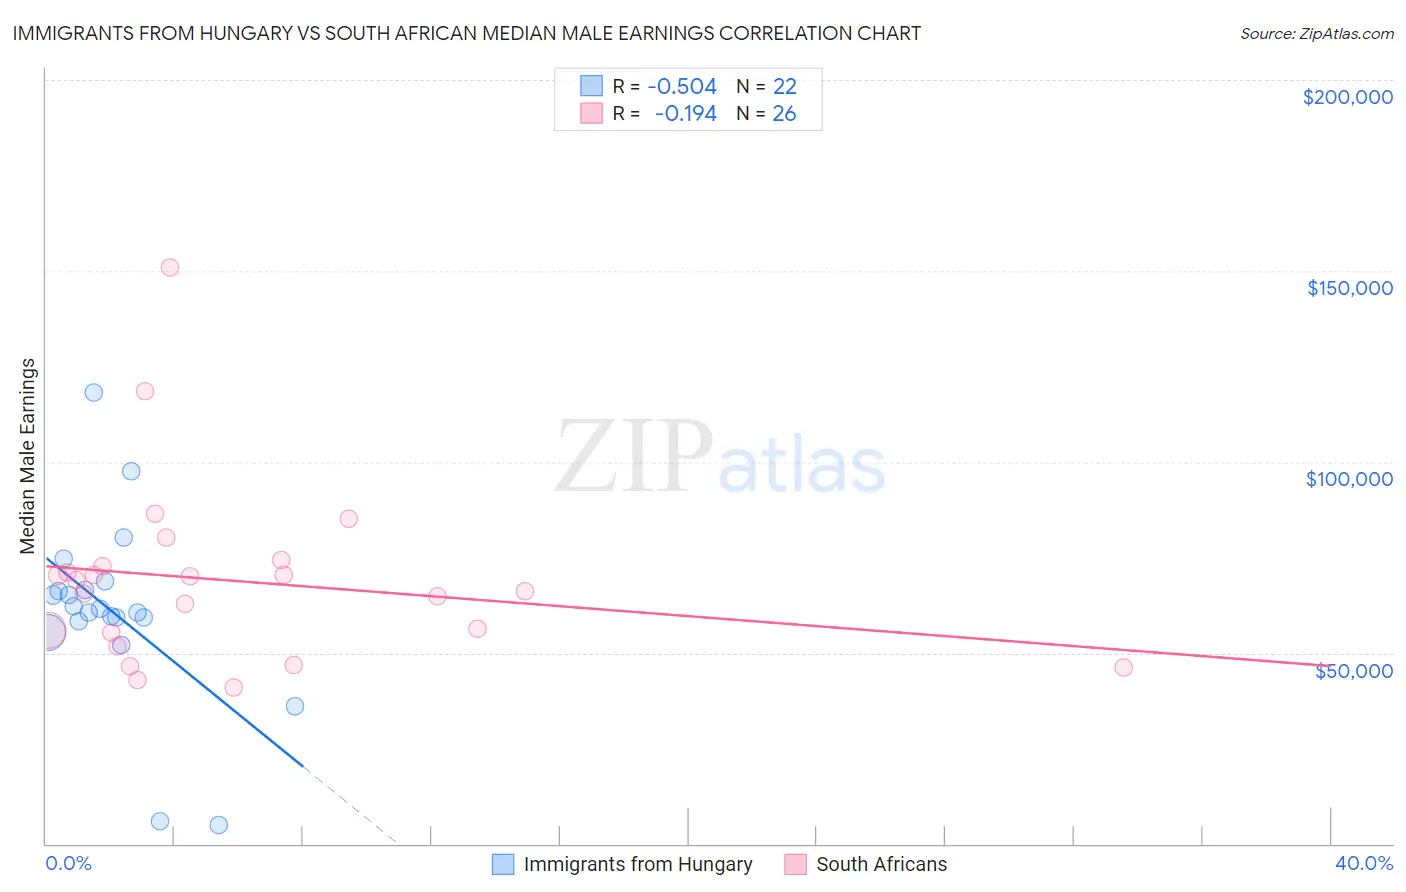 Immigrants from Hungary vs South African Median Male Earnings